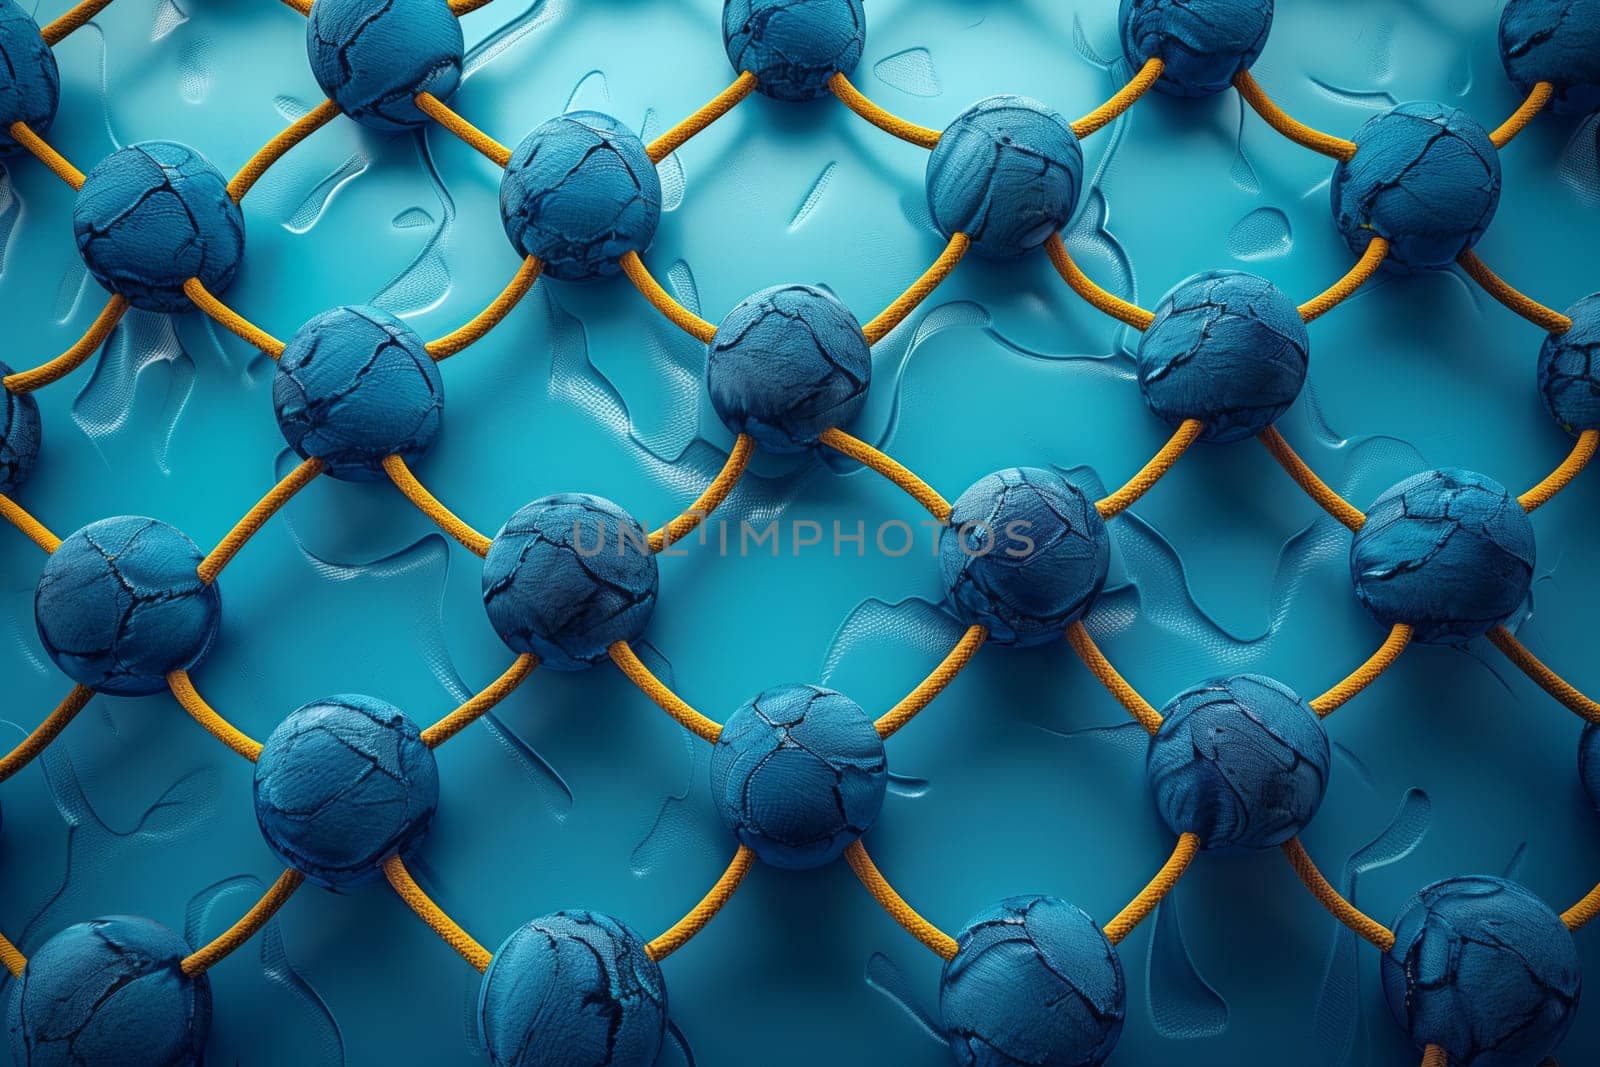 A close up of a steel wire fencing made with a symmetrical pattern of azure blueberries and yellow ropes, resembling an automotive tire mesh. The electric blue color pops against the metal grid